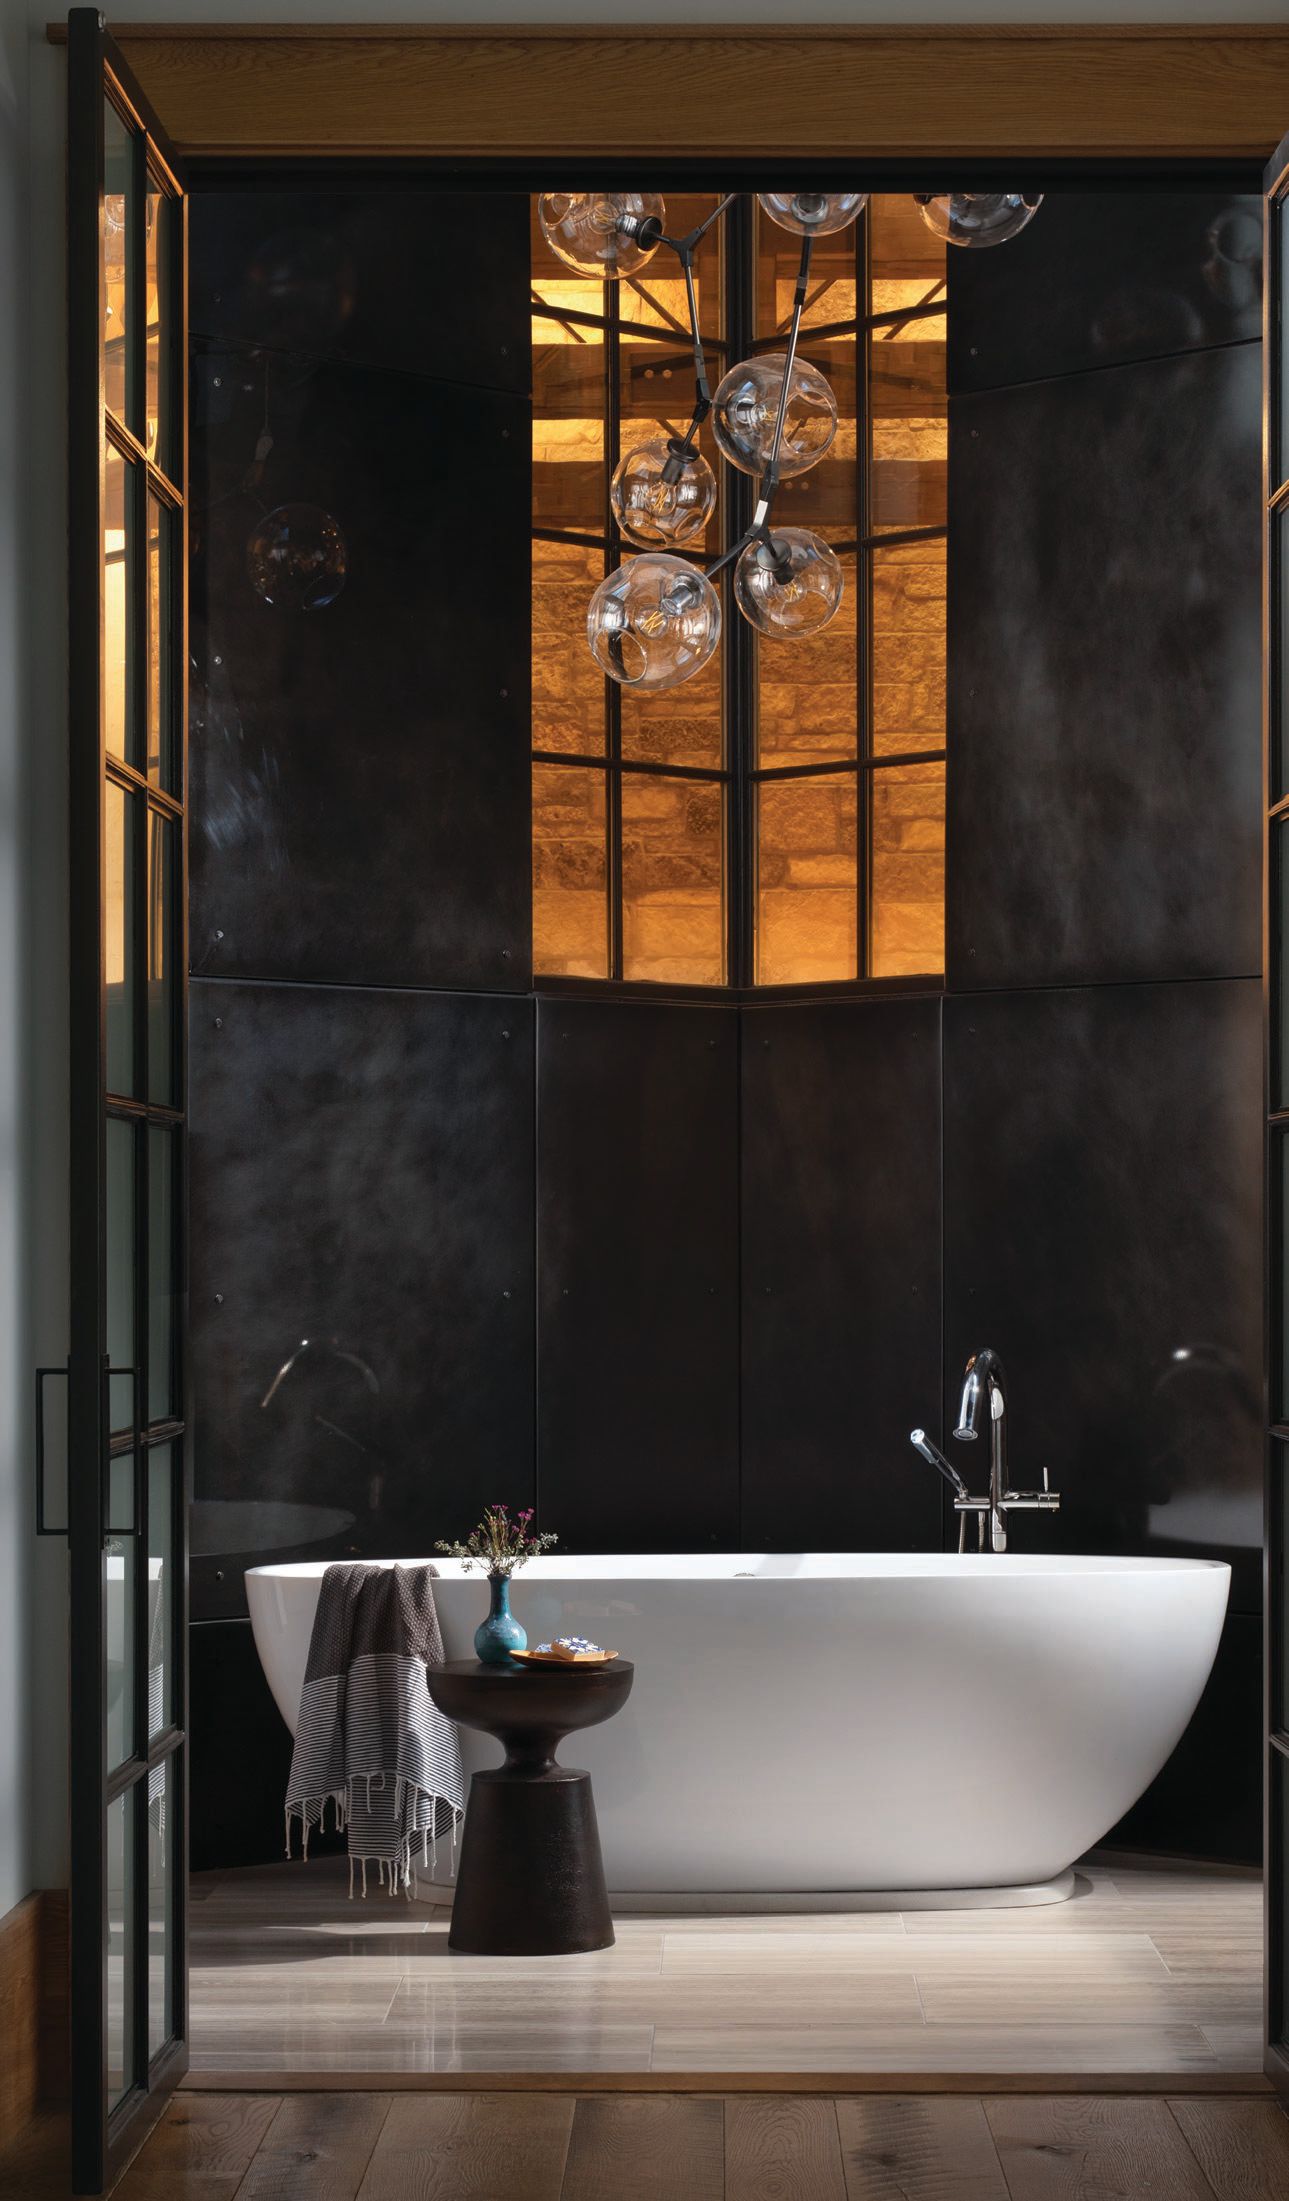 A free-standing Barcelona tub from Victoria   Albert with Riobel tub filler forms the centerpiece of the primary bathroom, which also features a striking vintage light fixture. Photographed by Ryan Hainey